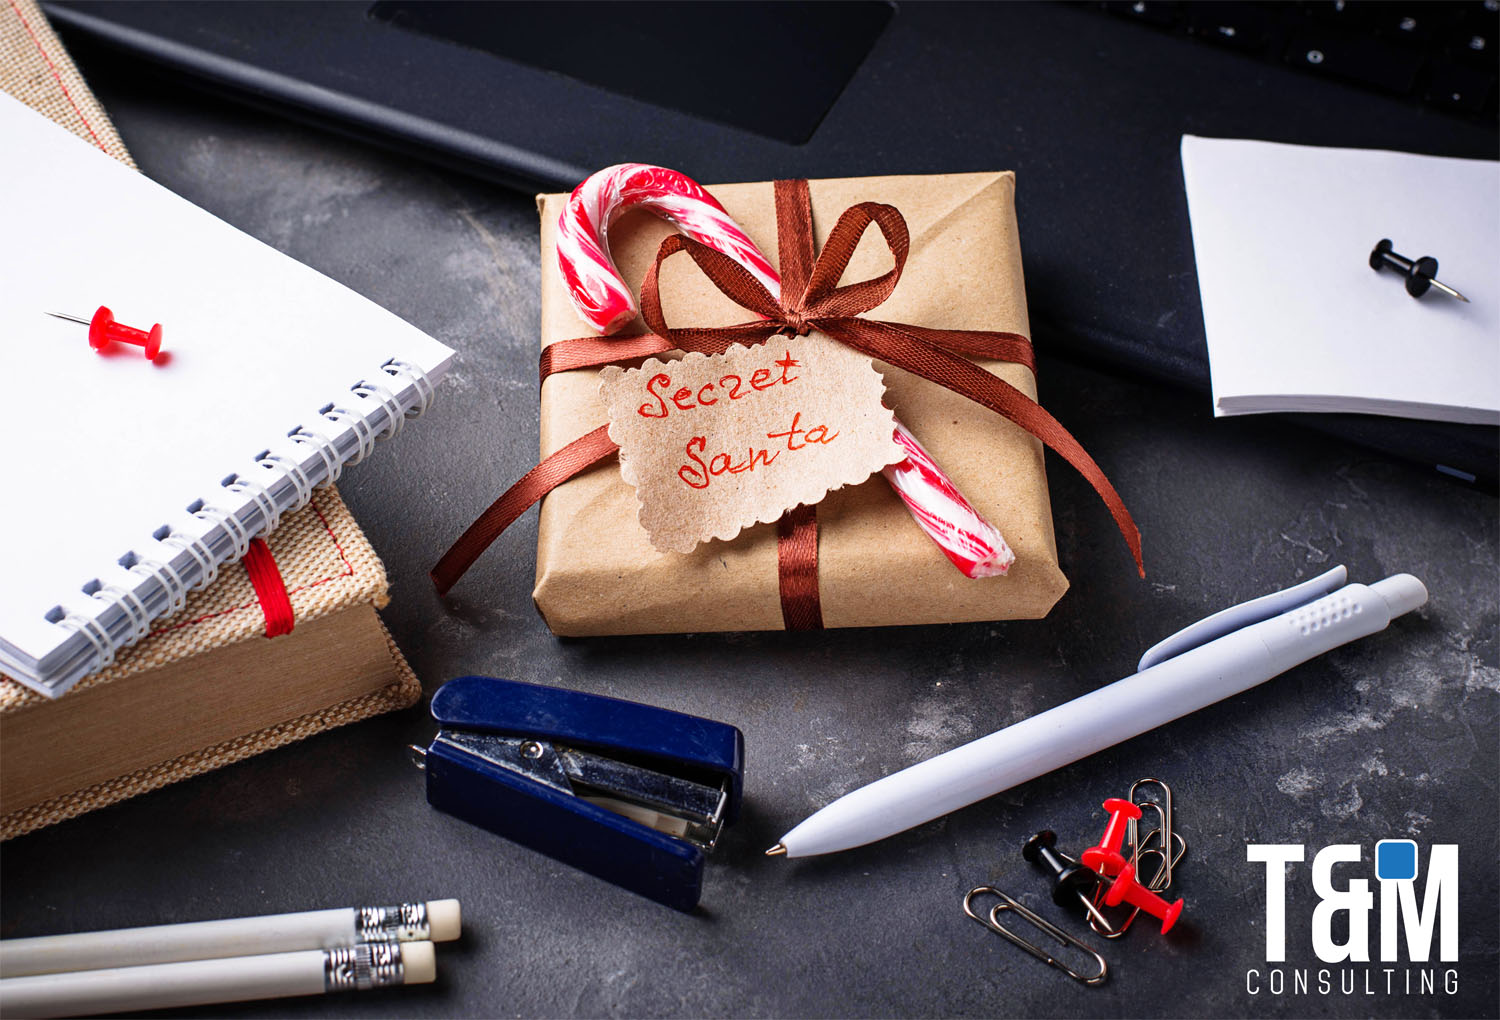 5 Technological gifts for your colleagues this Christmas